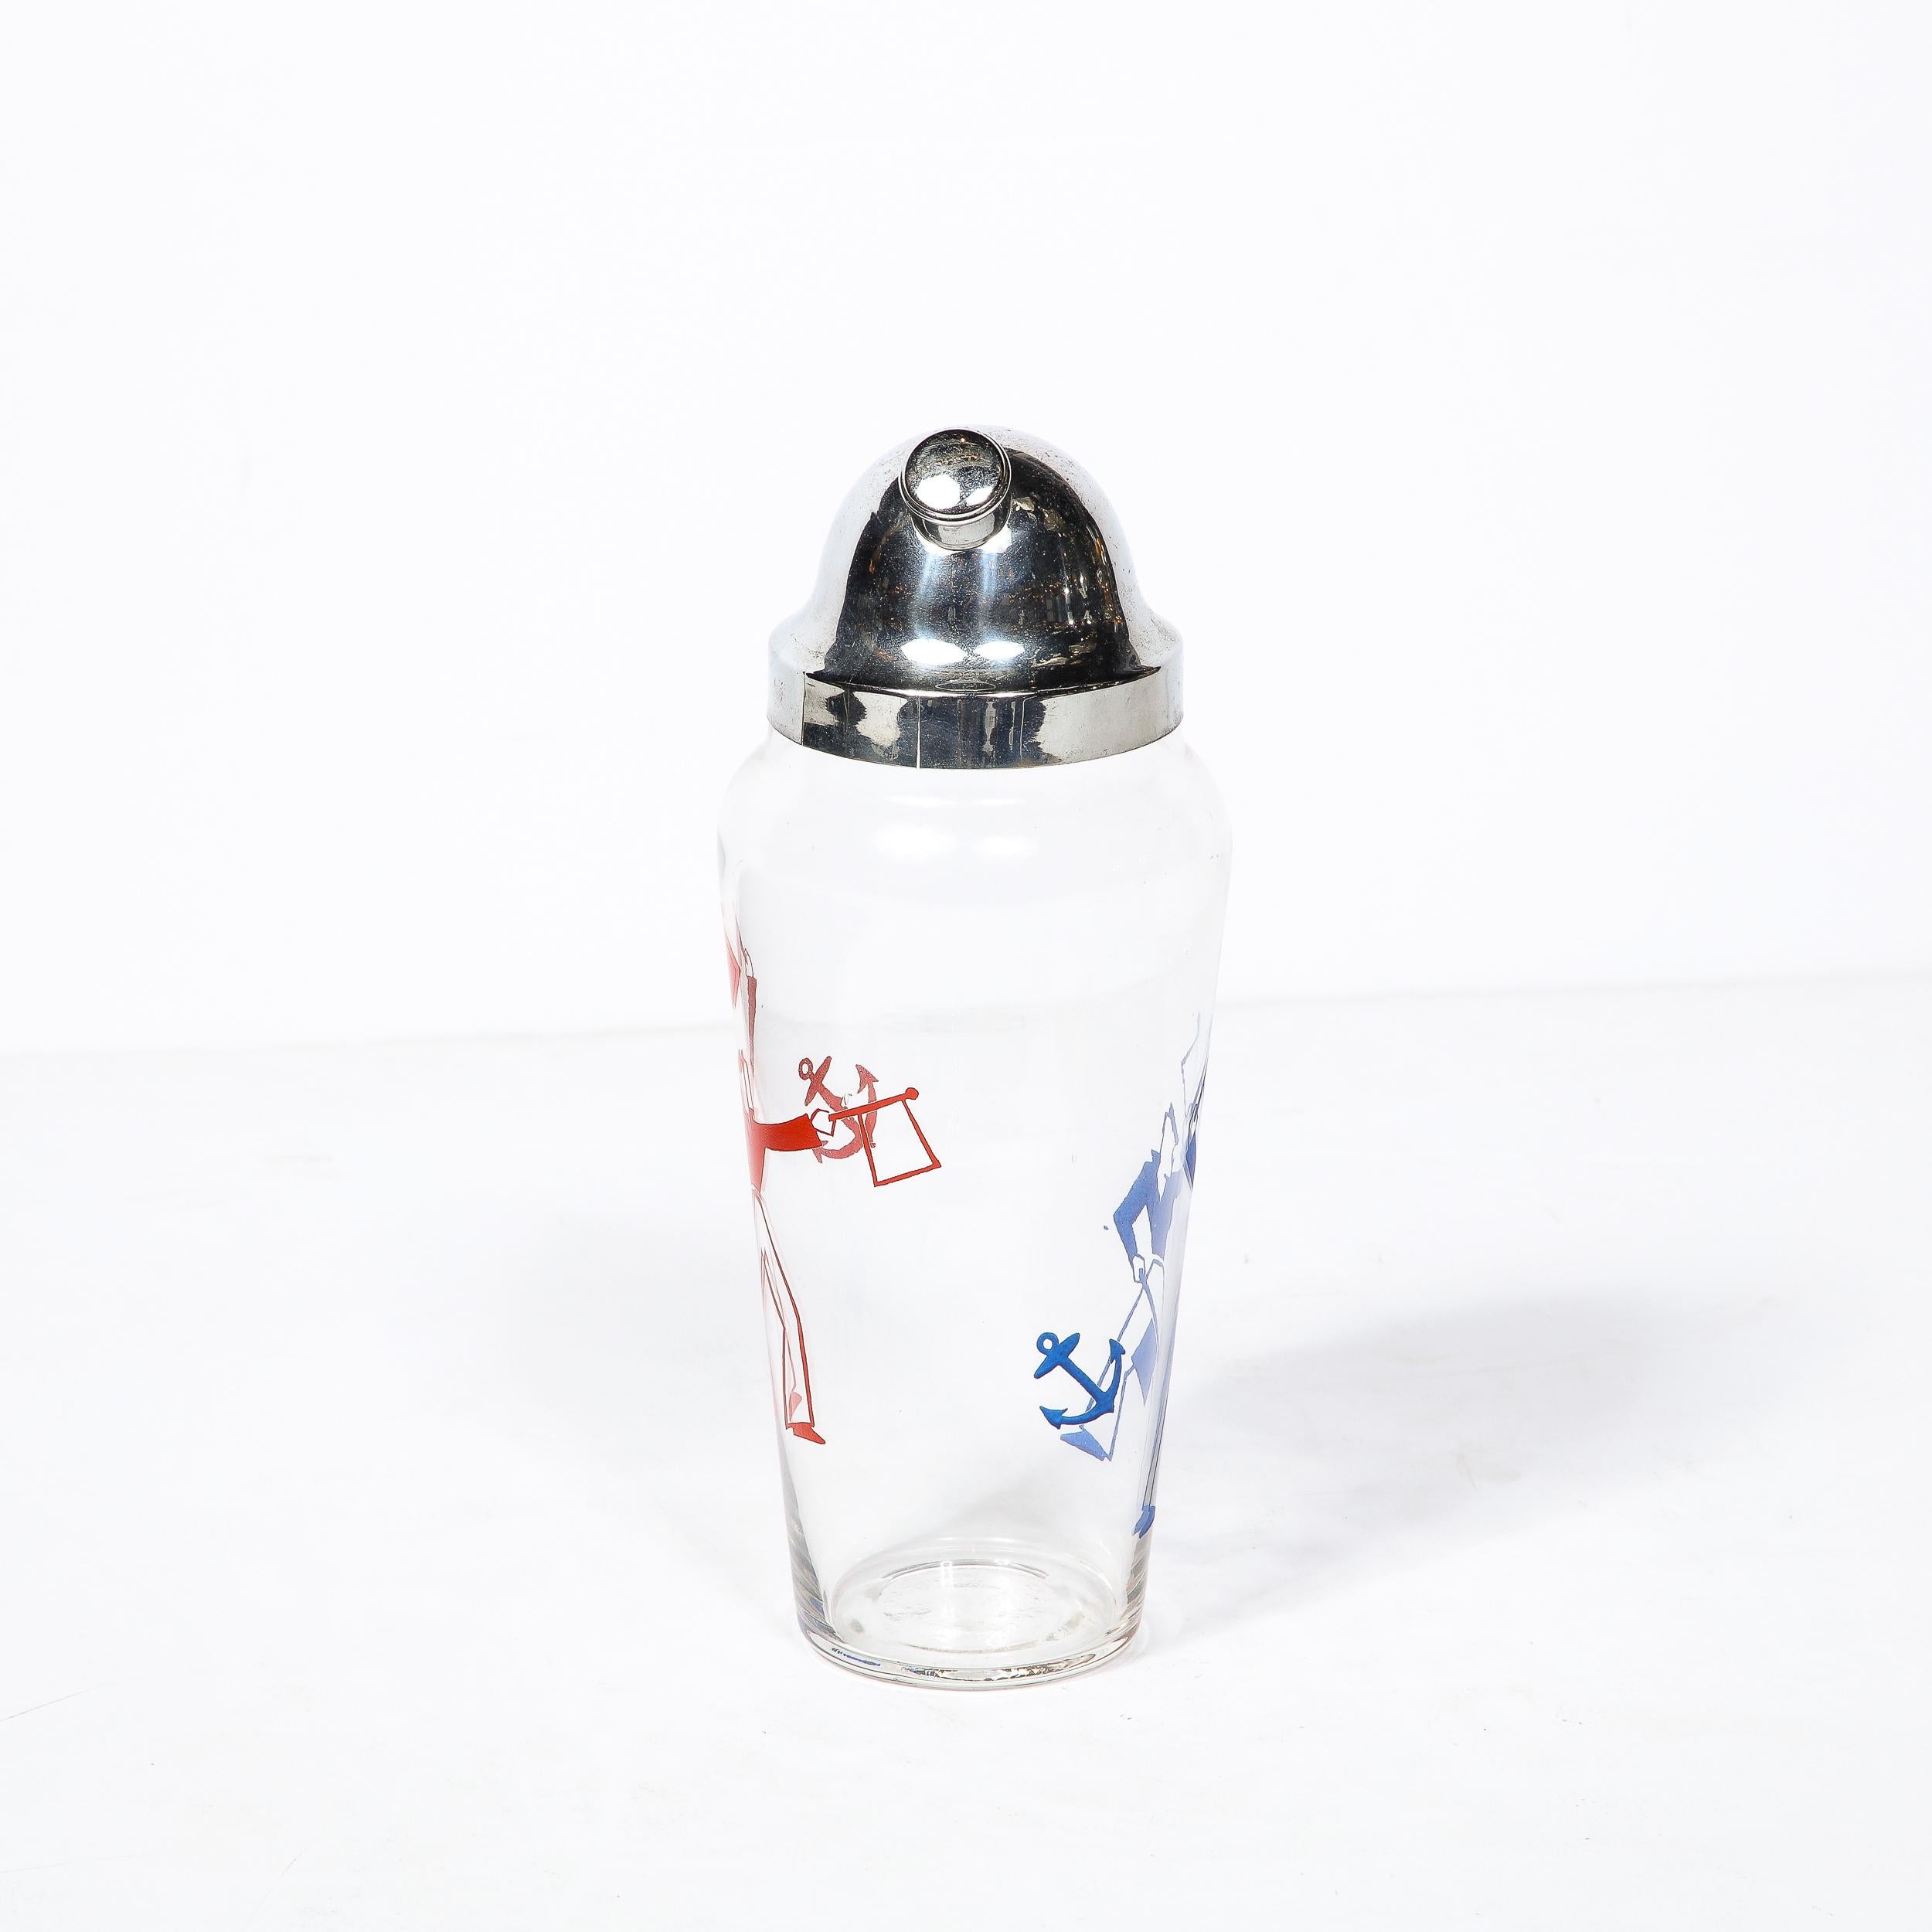 Art Deco Whimsical Cocktail Shaker in Chrome with Sailors in Red and Blue  2